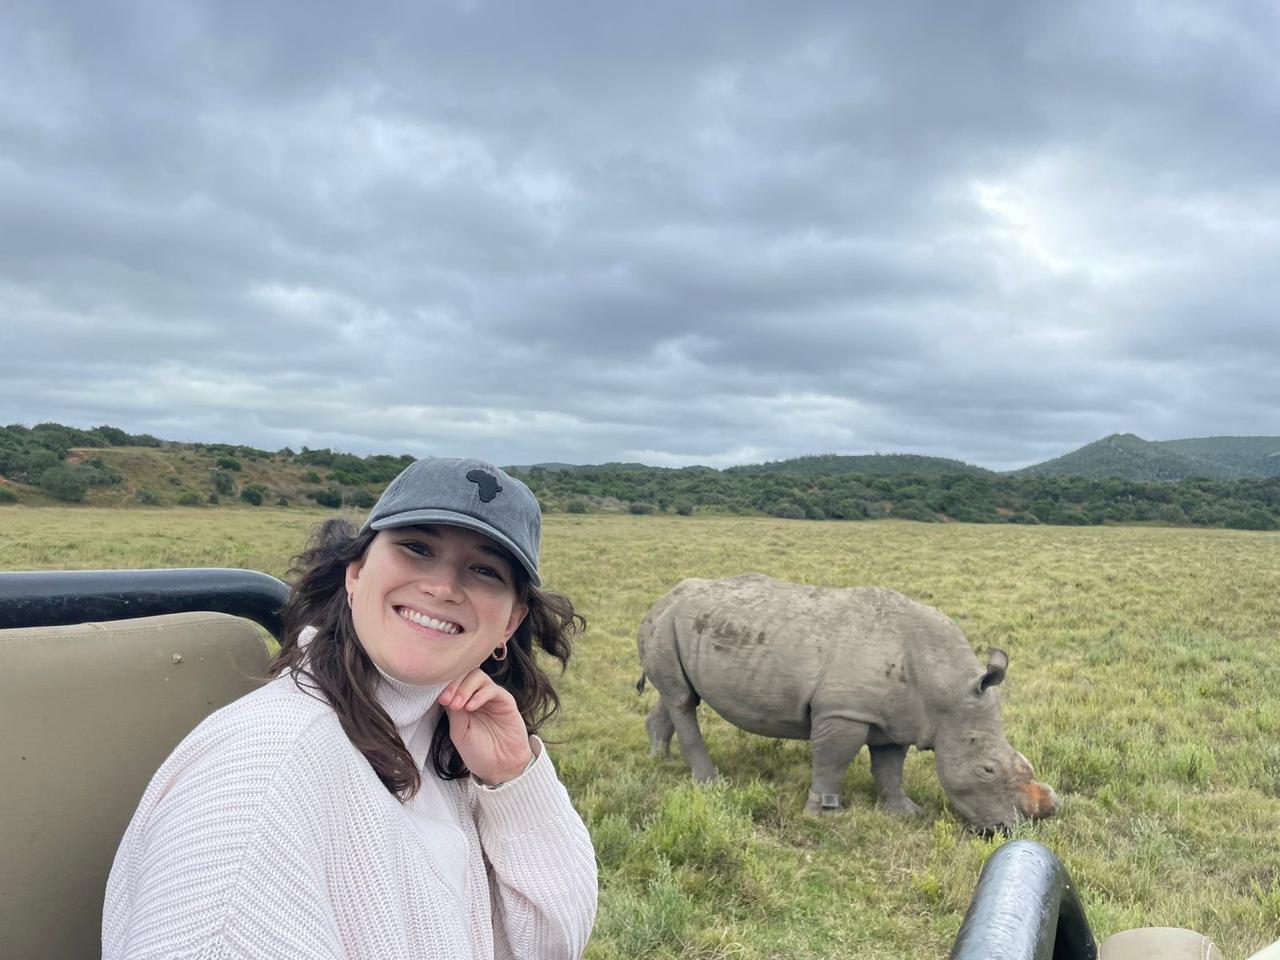 Jess in her happy place at Kariega Game Reserve